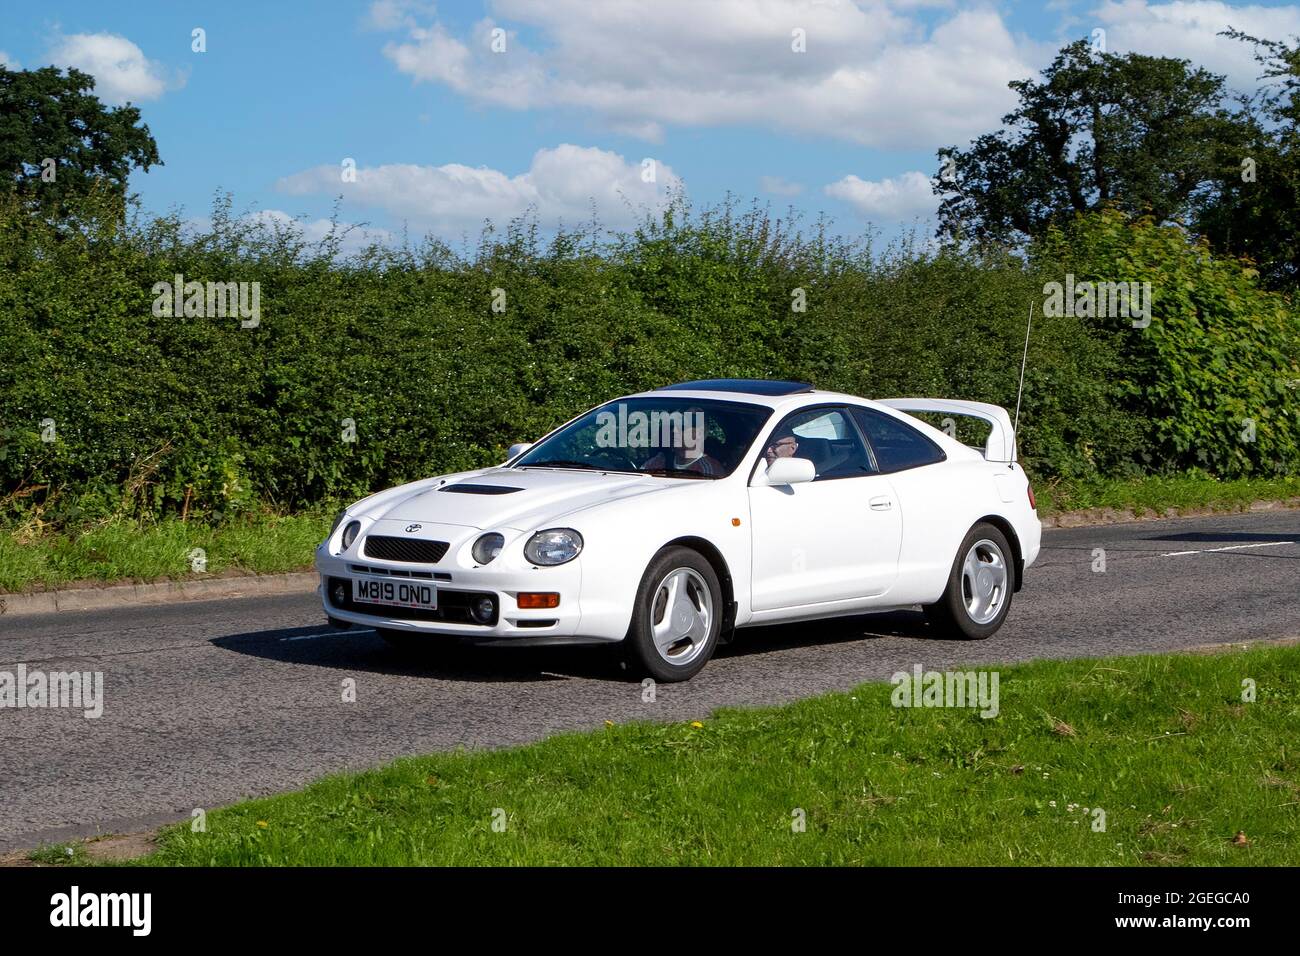 A front view of 1990s 90s Toyota Celica Gt-4 White Coupe vintage classic car retro driver vehicle automobile Stock Photo